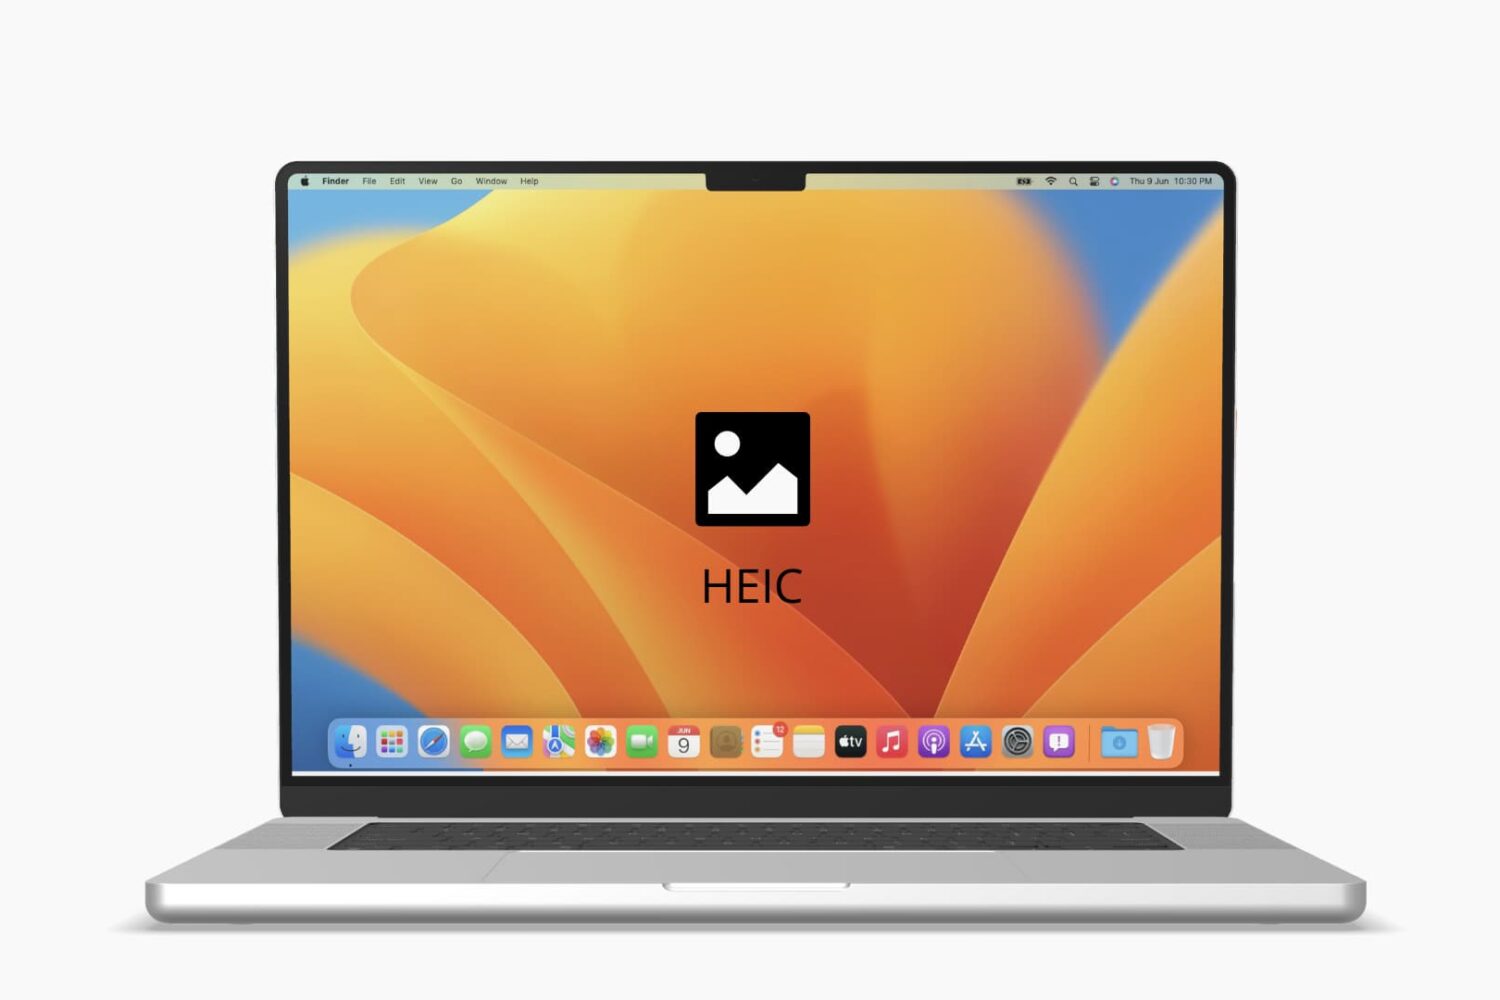 Easy steps to open HEIC images on Mac